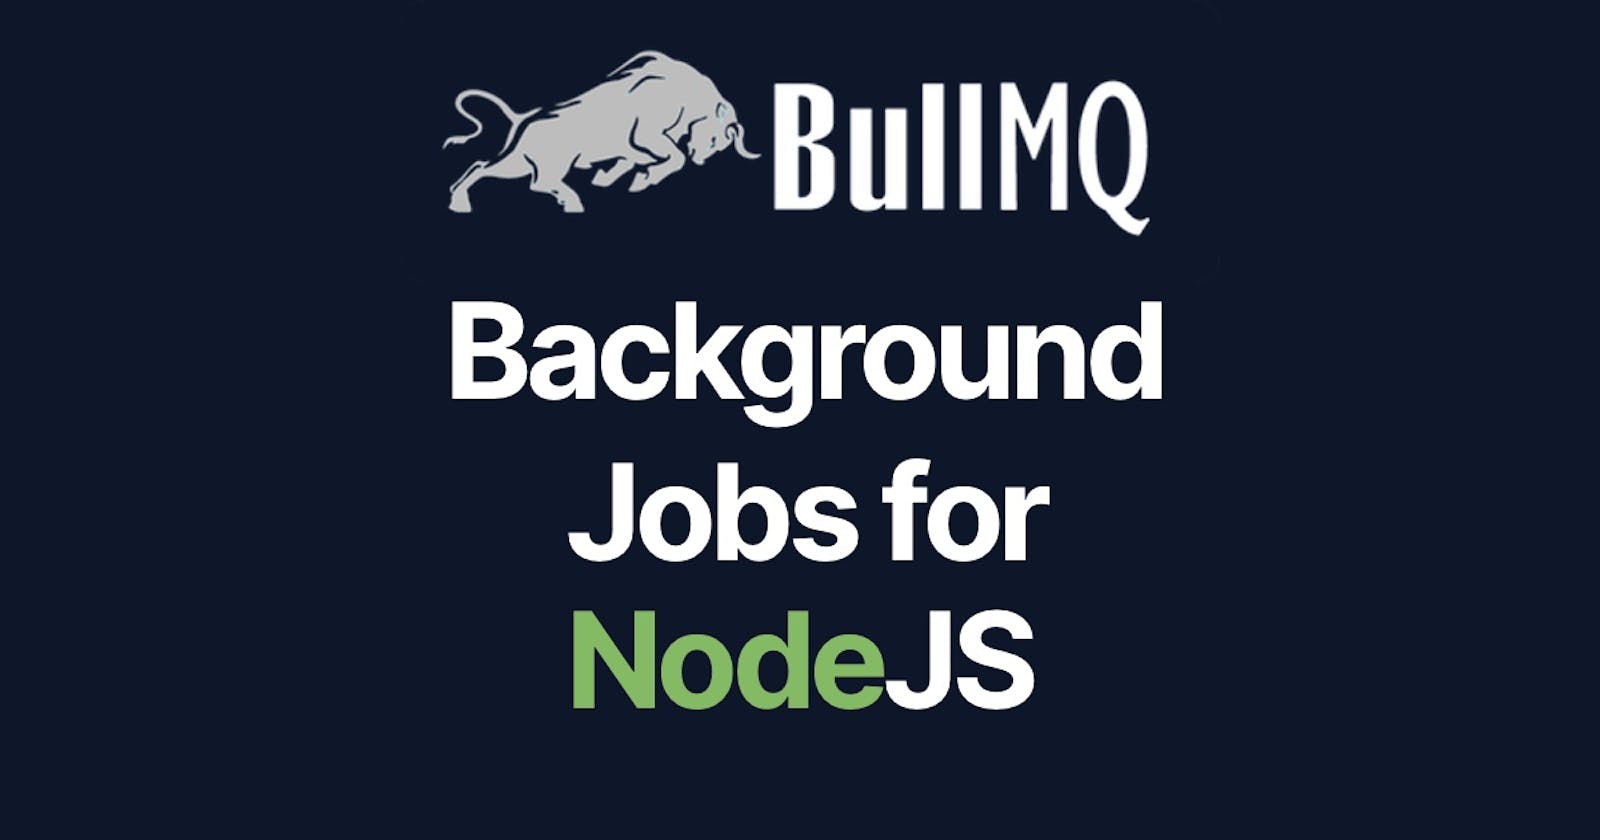 A Deep Dive into Retryable Jobs with BullMQ